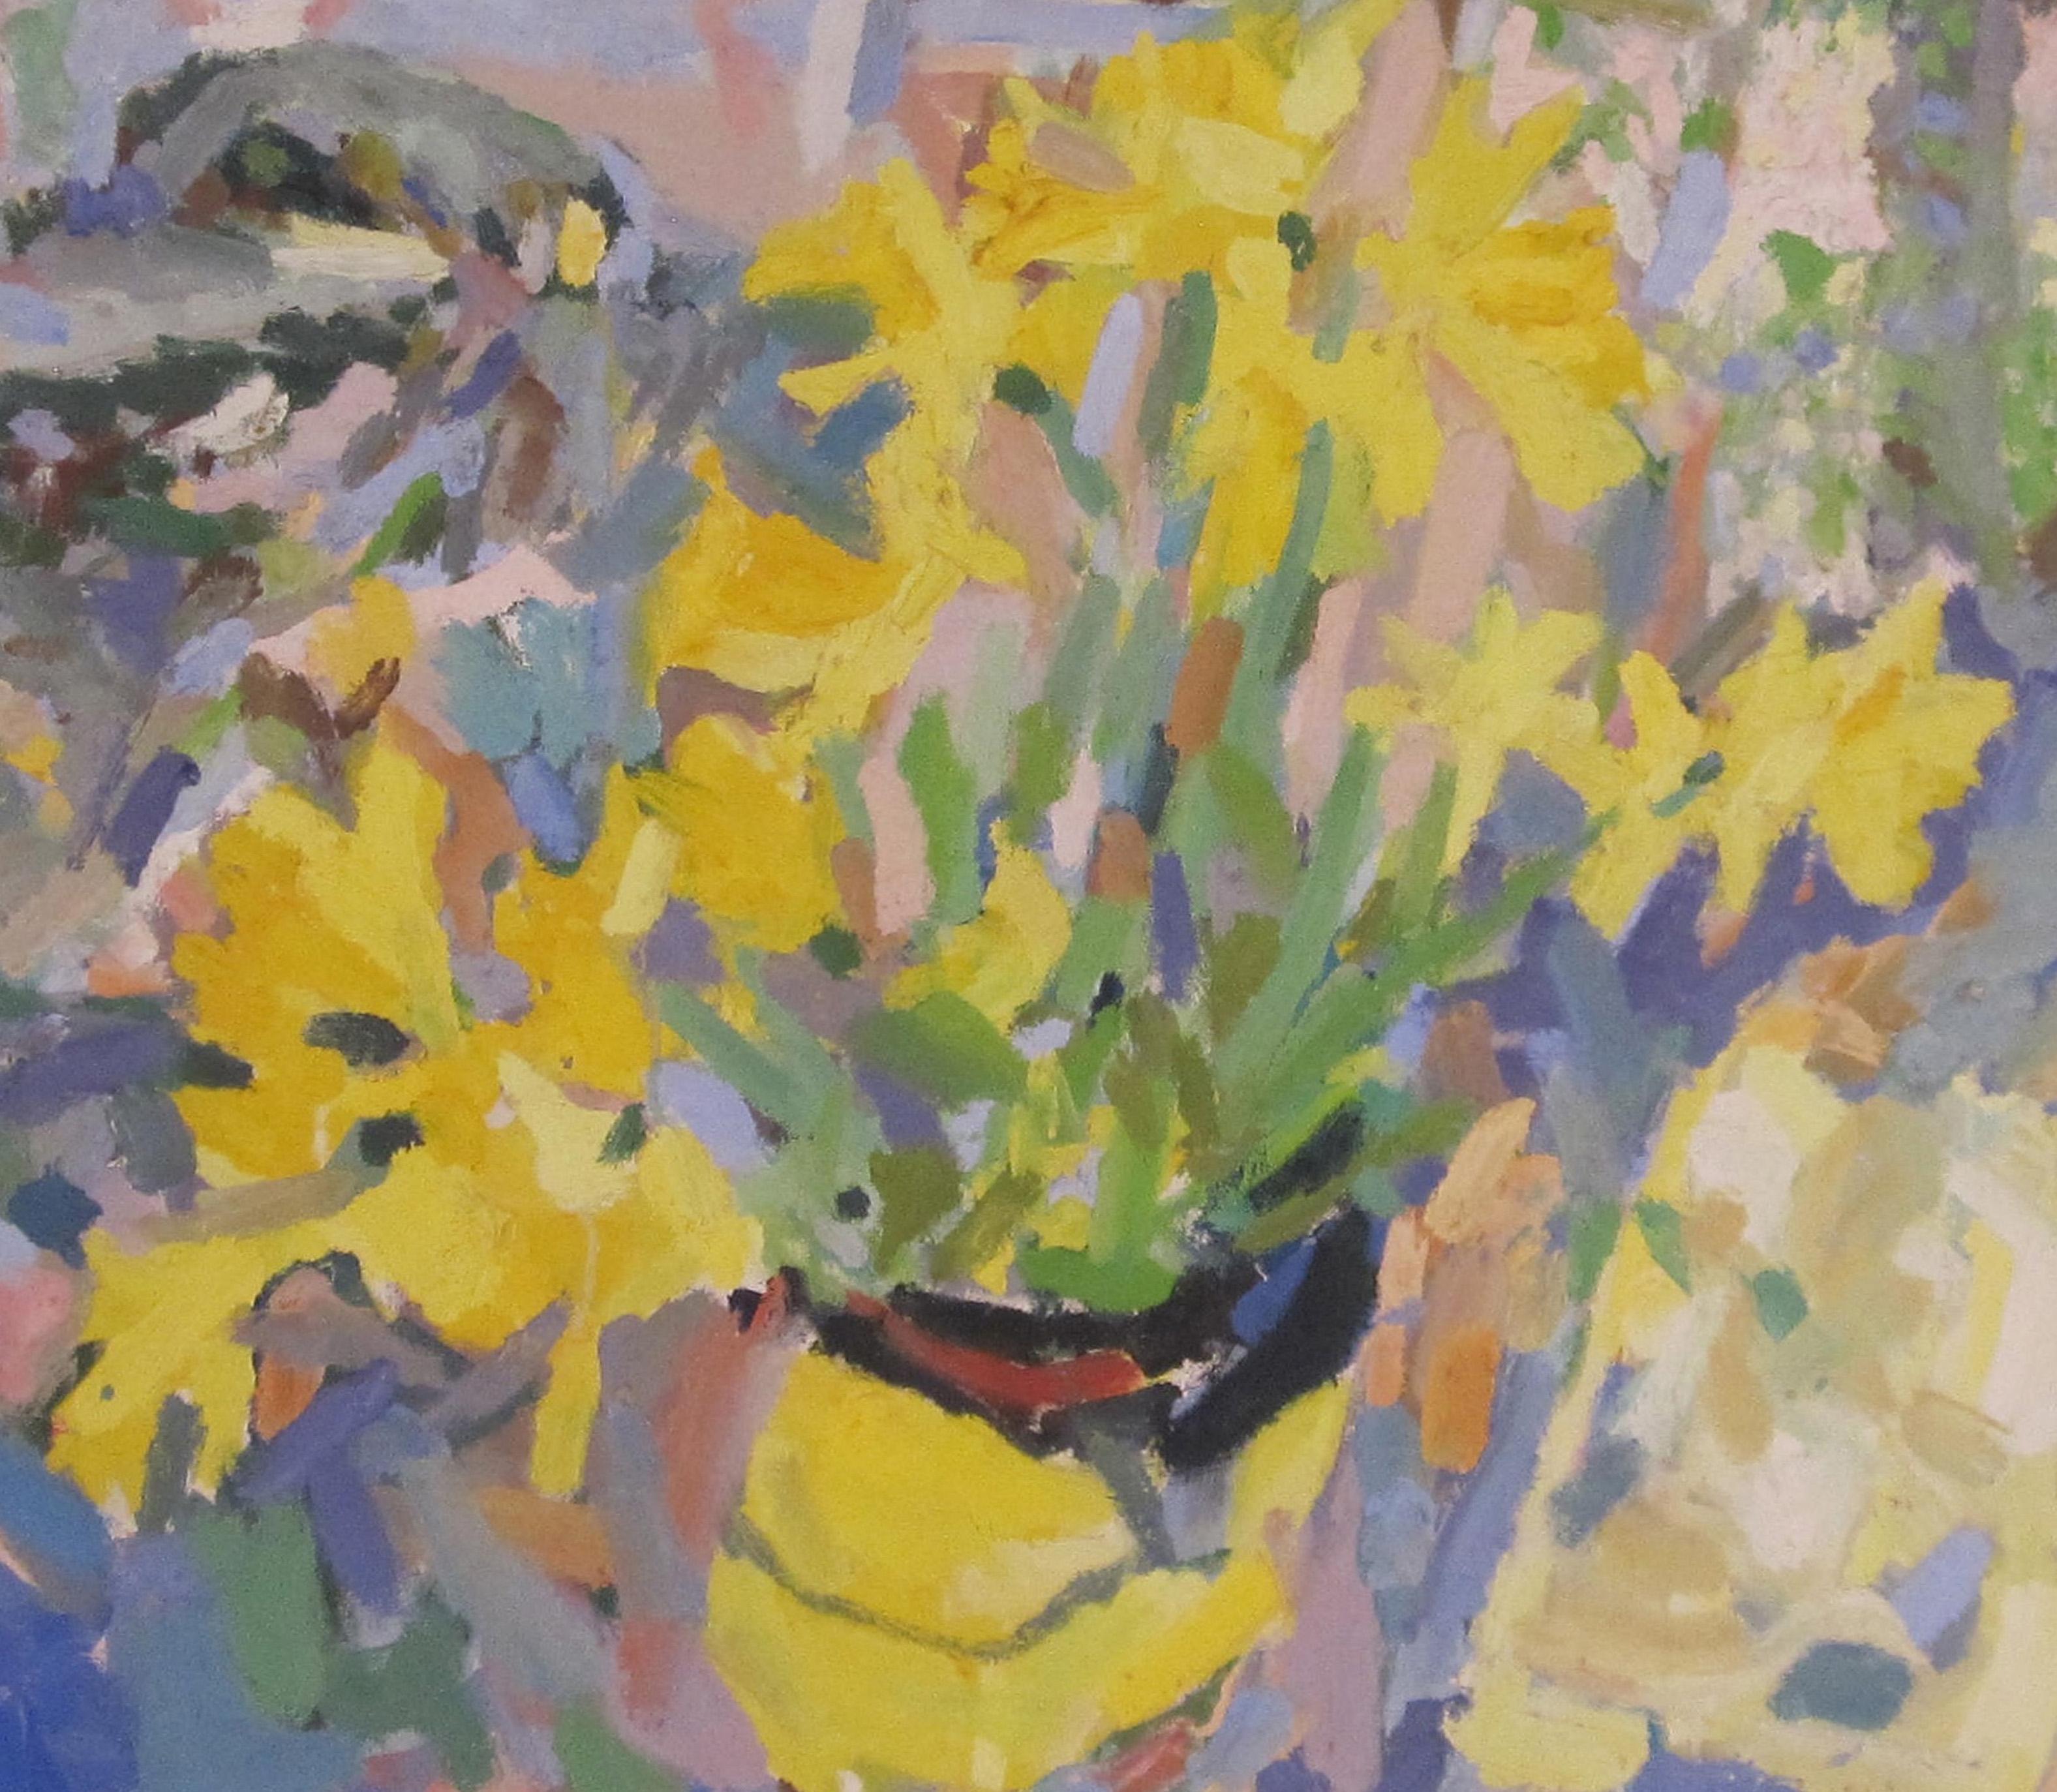 British Contemporary oil painting of Daffodils by artist Rosie Montford 2